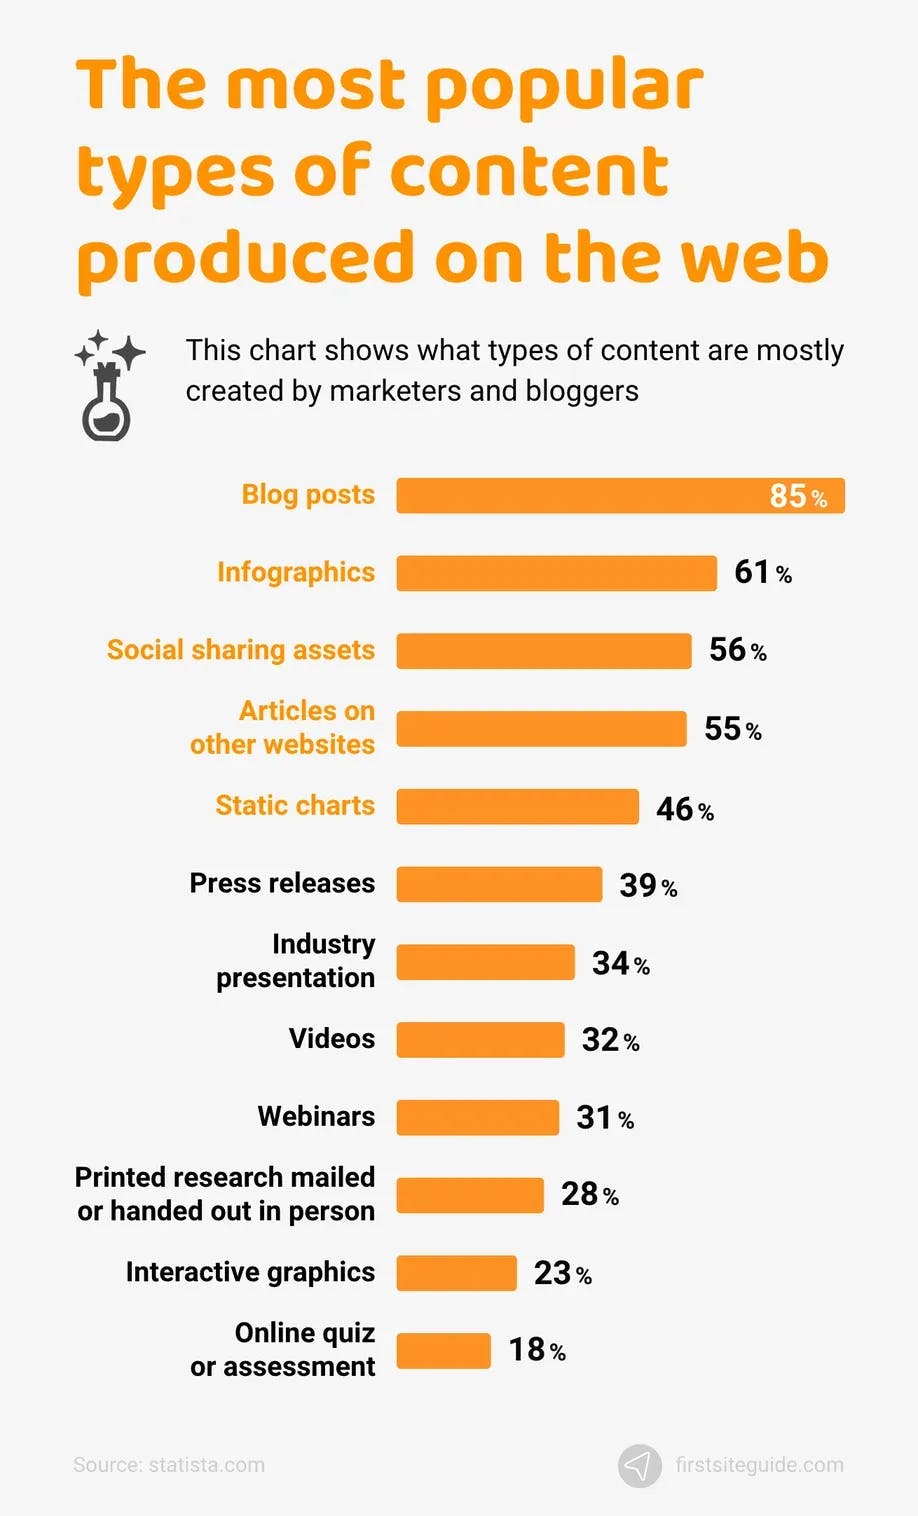 Chart showing that the most popular type of content produced on the web are blog posts.